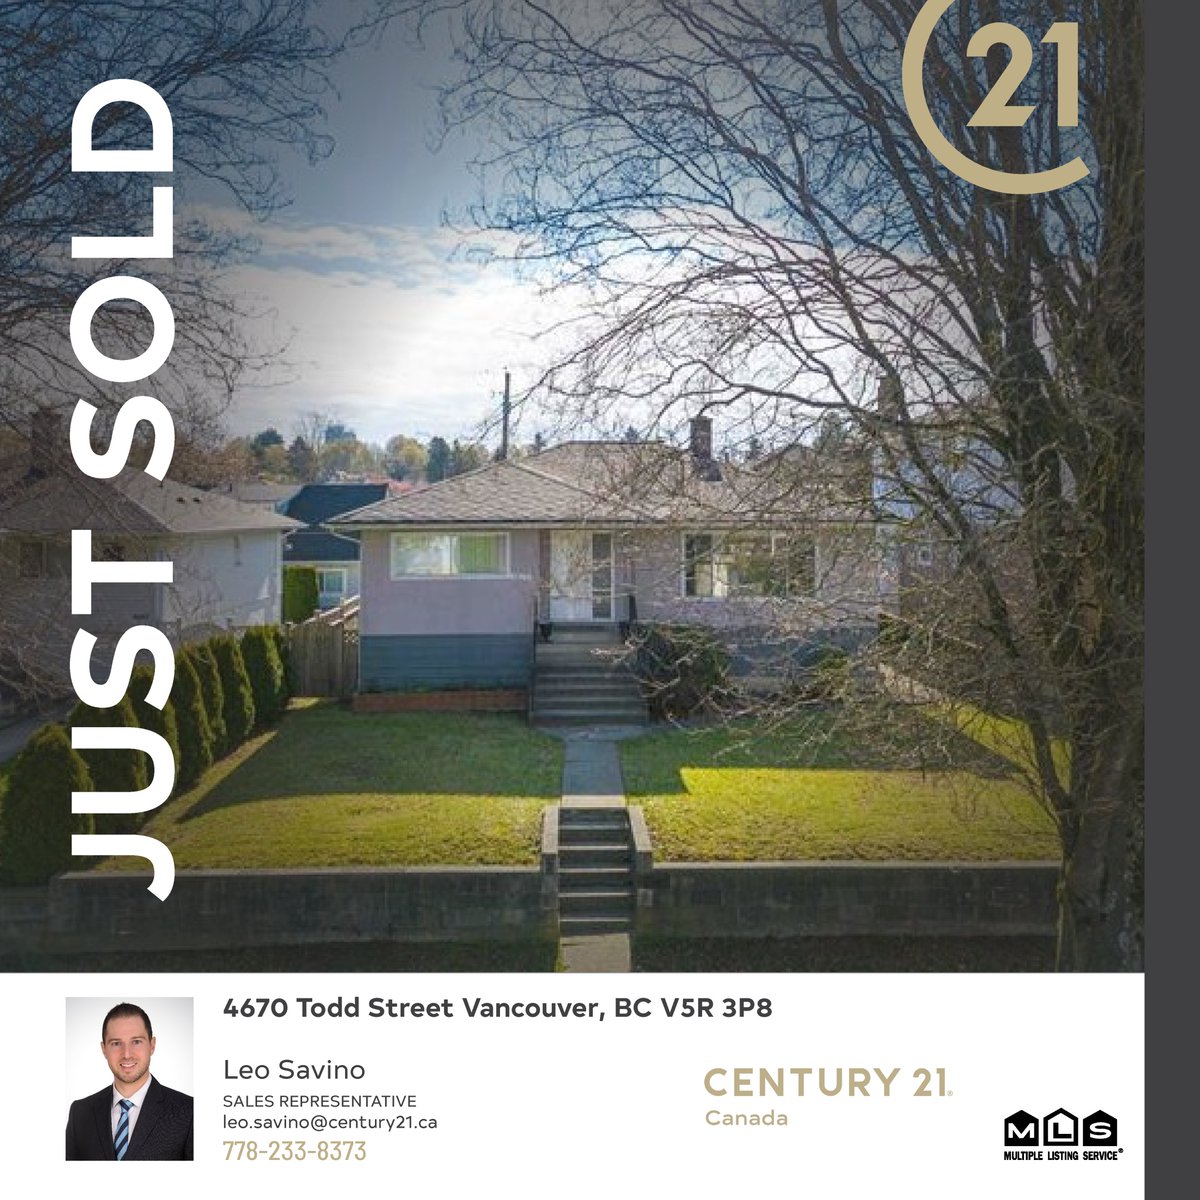 Congratulations, Leo, on another successful property sale! Thank you for all your efforts and contributions.

#Century21 #Century21intownrealty #century21vancouver #century21canada #Century21realestate #century21agent #century21realtor #JustSold #Sold #RealEstateSuccess